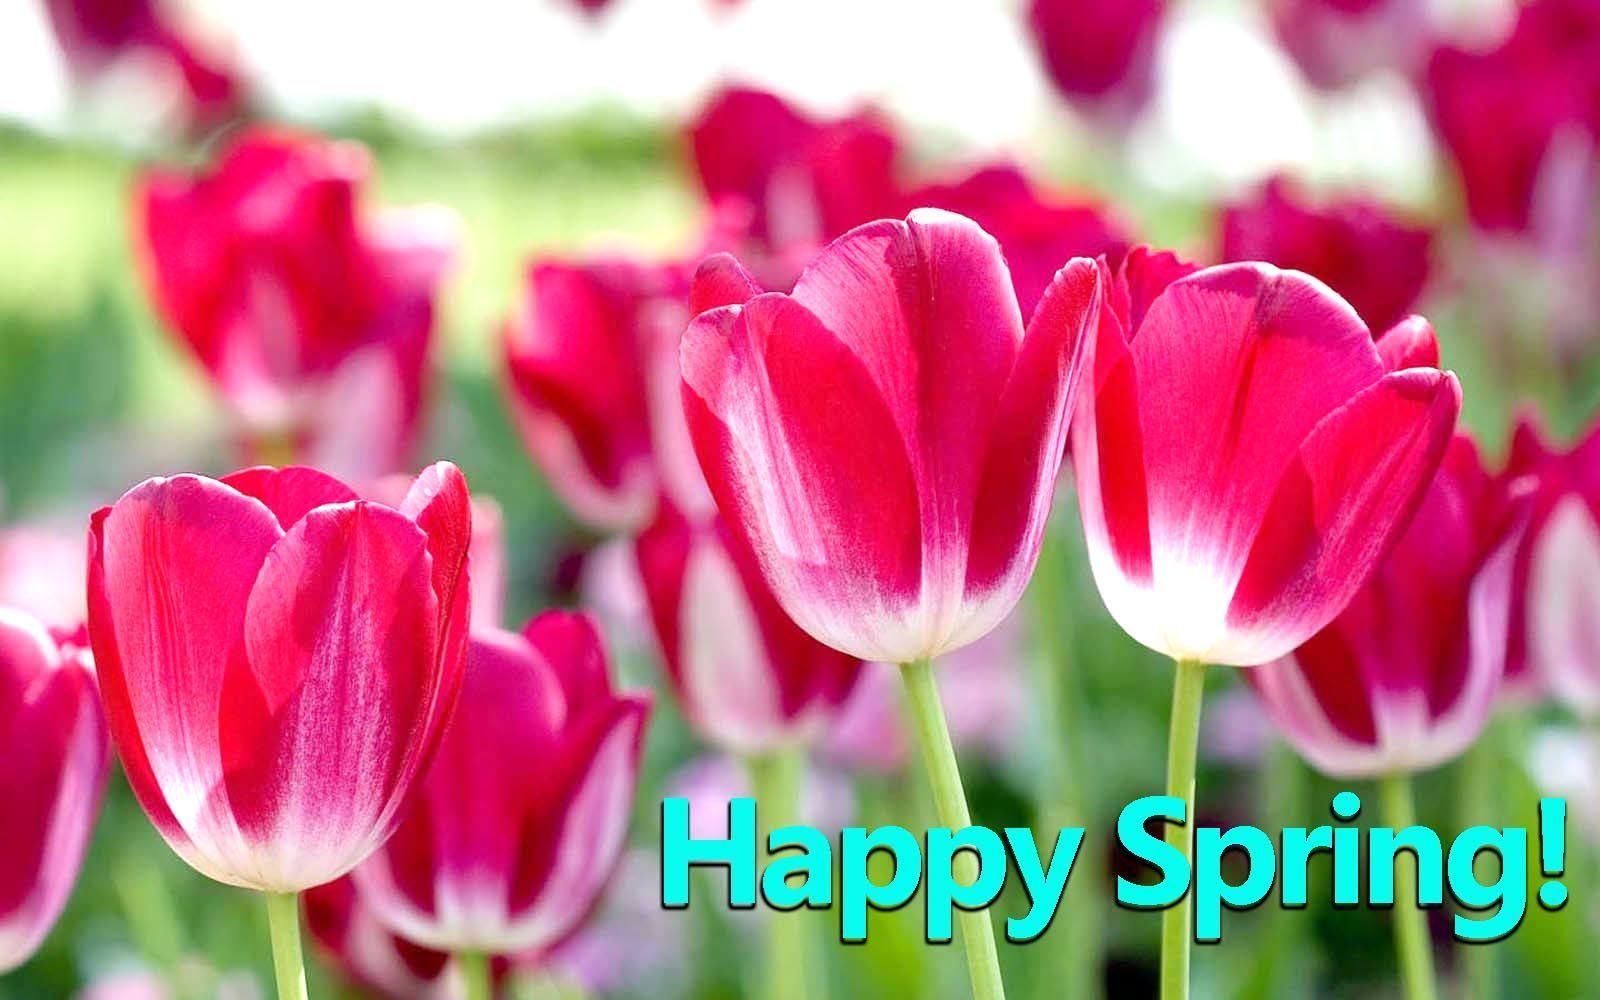 Wishing you a happy first day of spring! #HappySpring #Sunshine